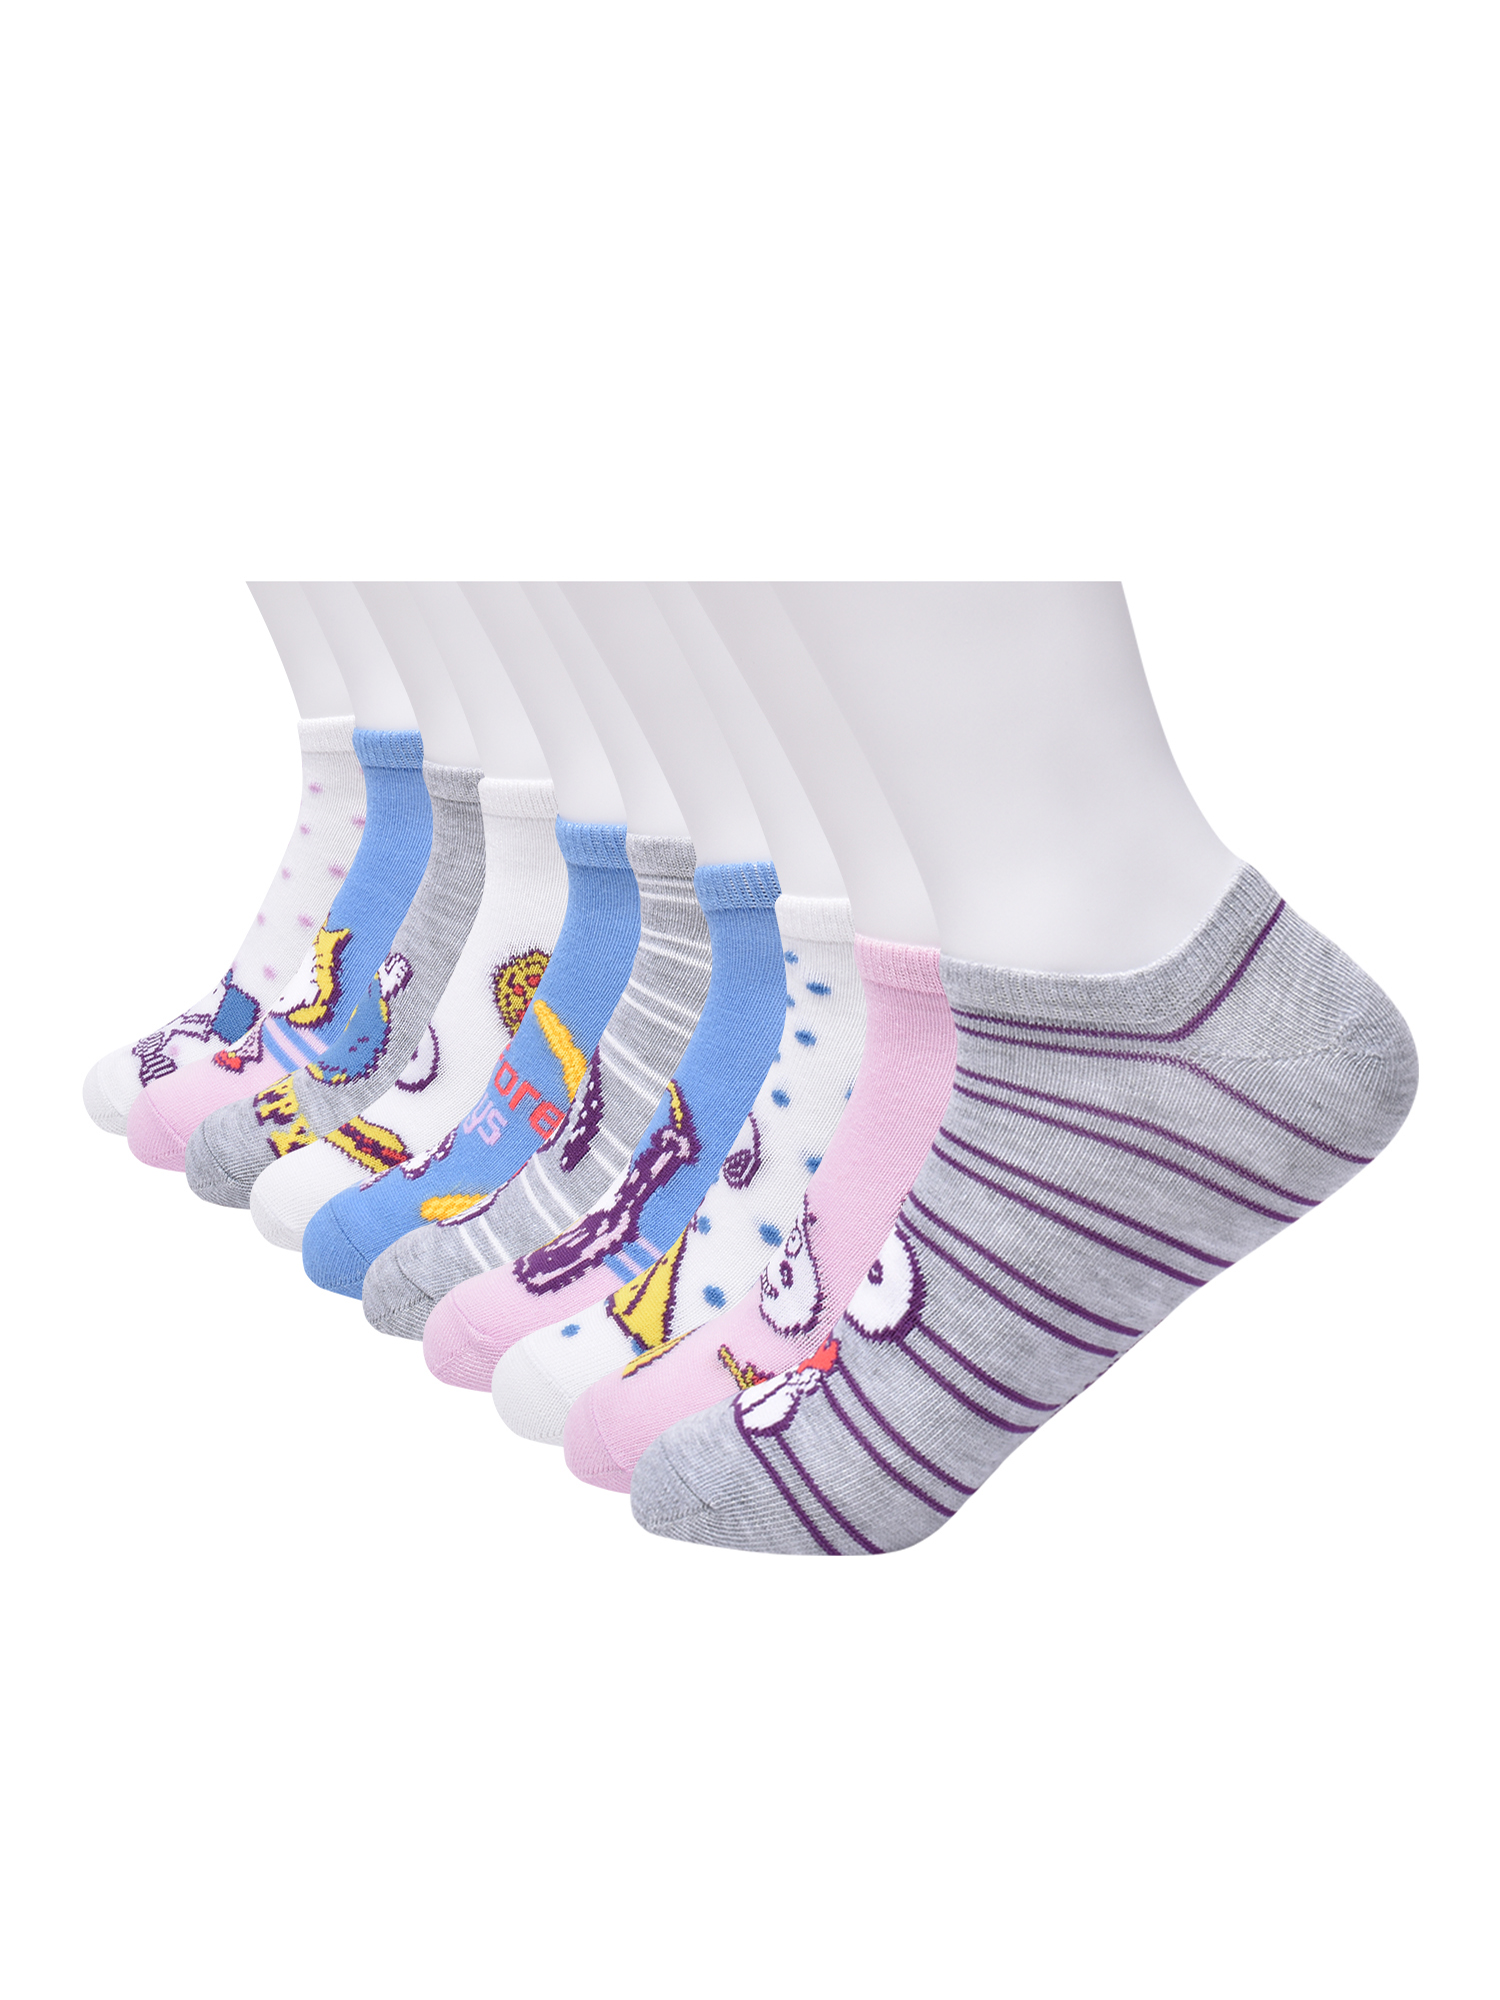 Peanuts Womens Graphic Super No Show Socks, 10-Pack, Sizes 4-10 - image 3 of 5